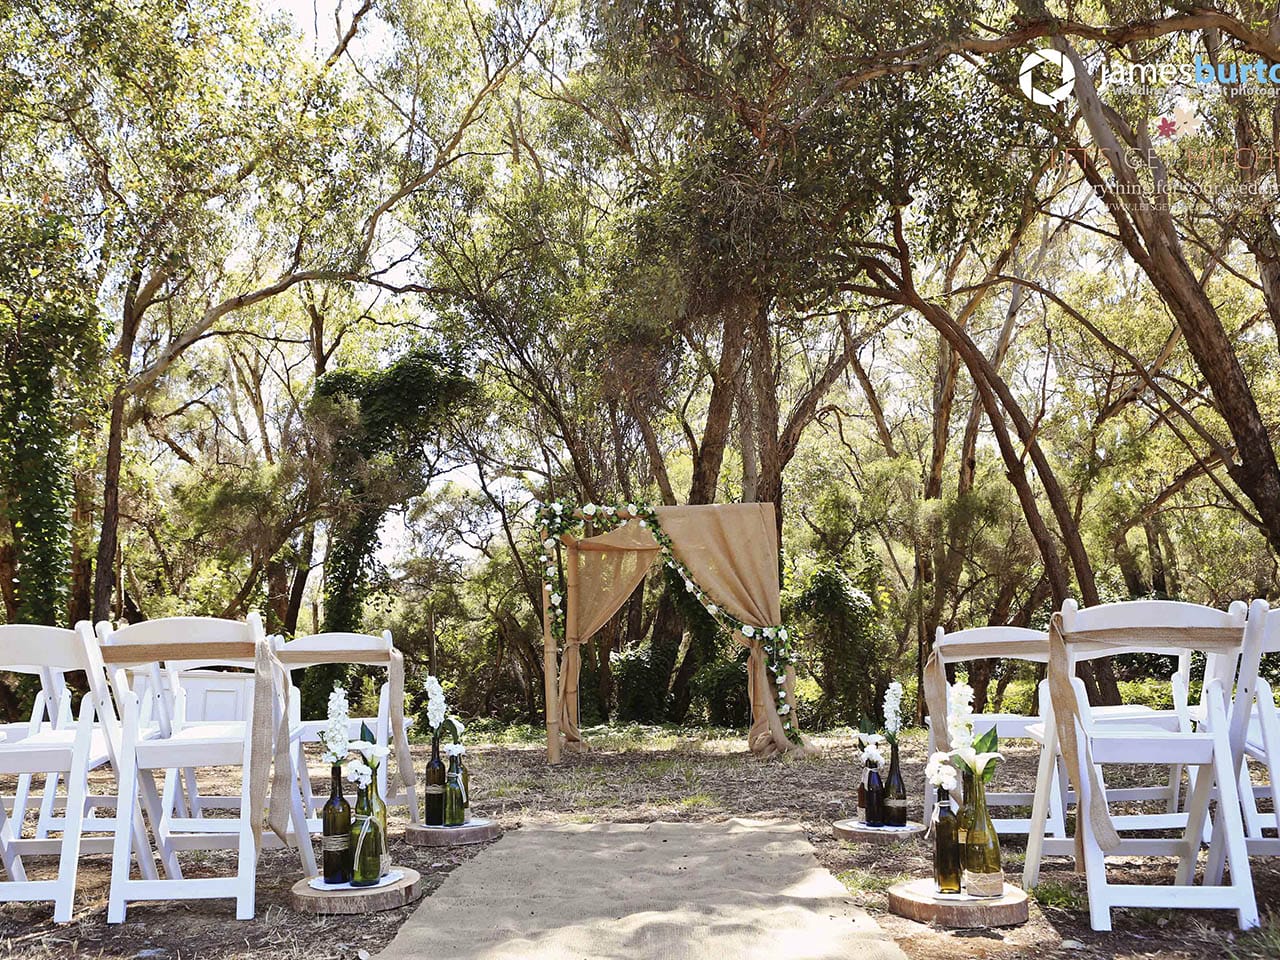 Beautifully adorned arbour with flowers and cloth surounded with white seats facing a forest backdrop